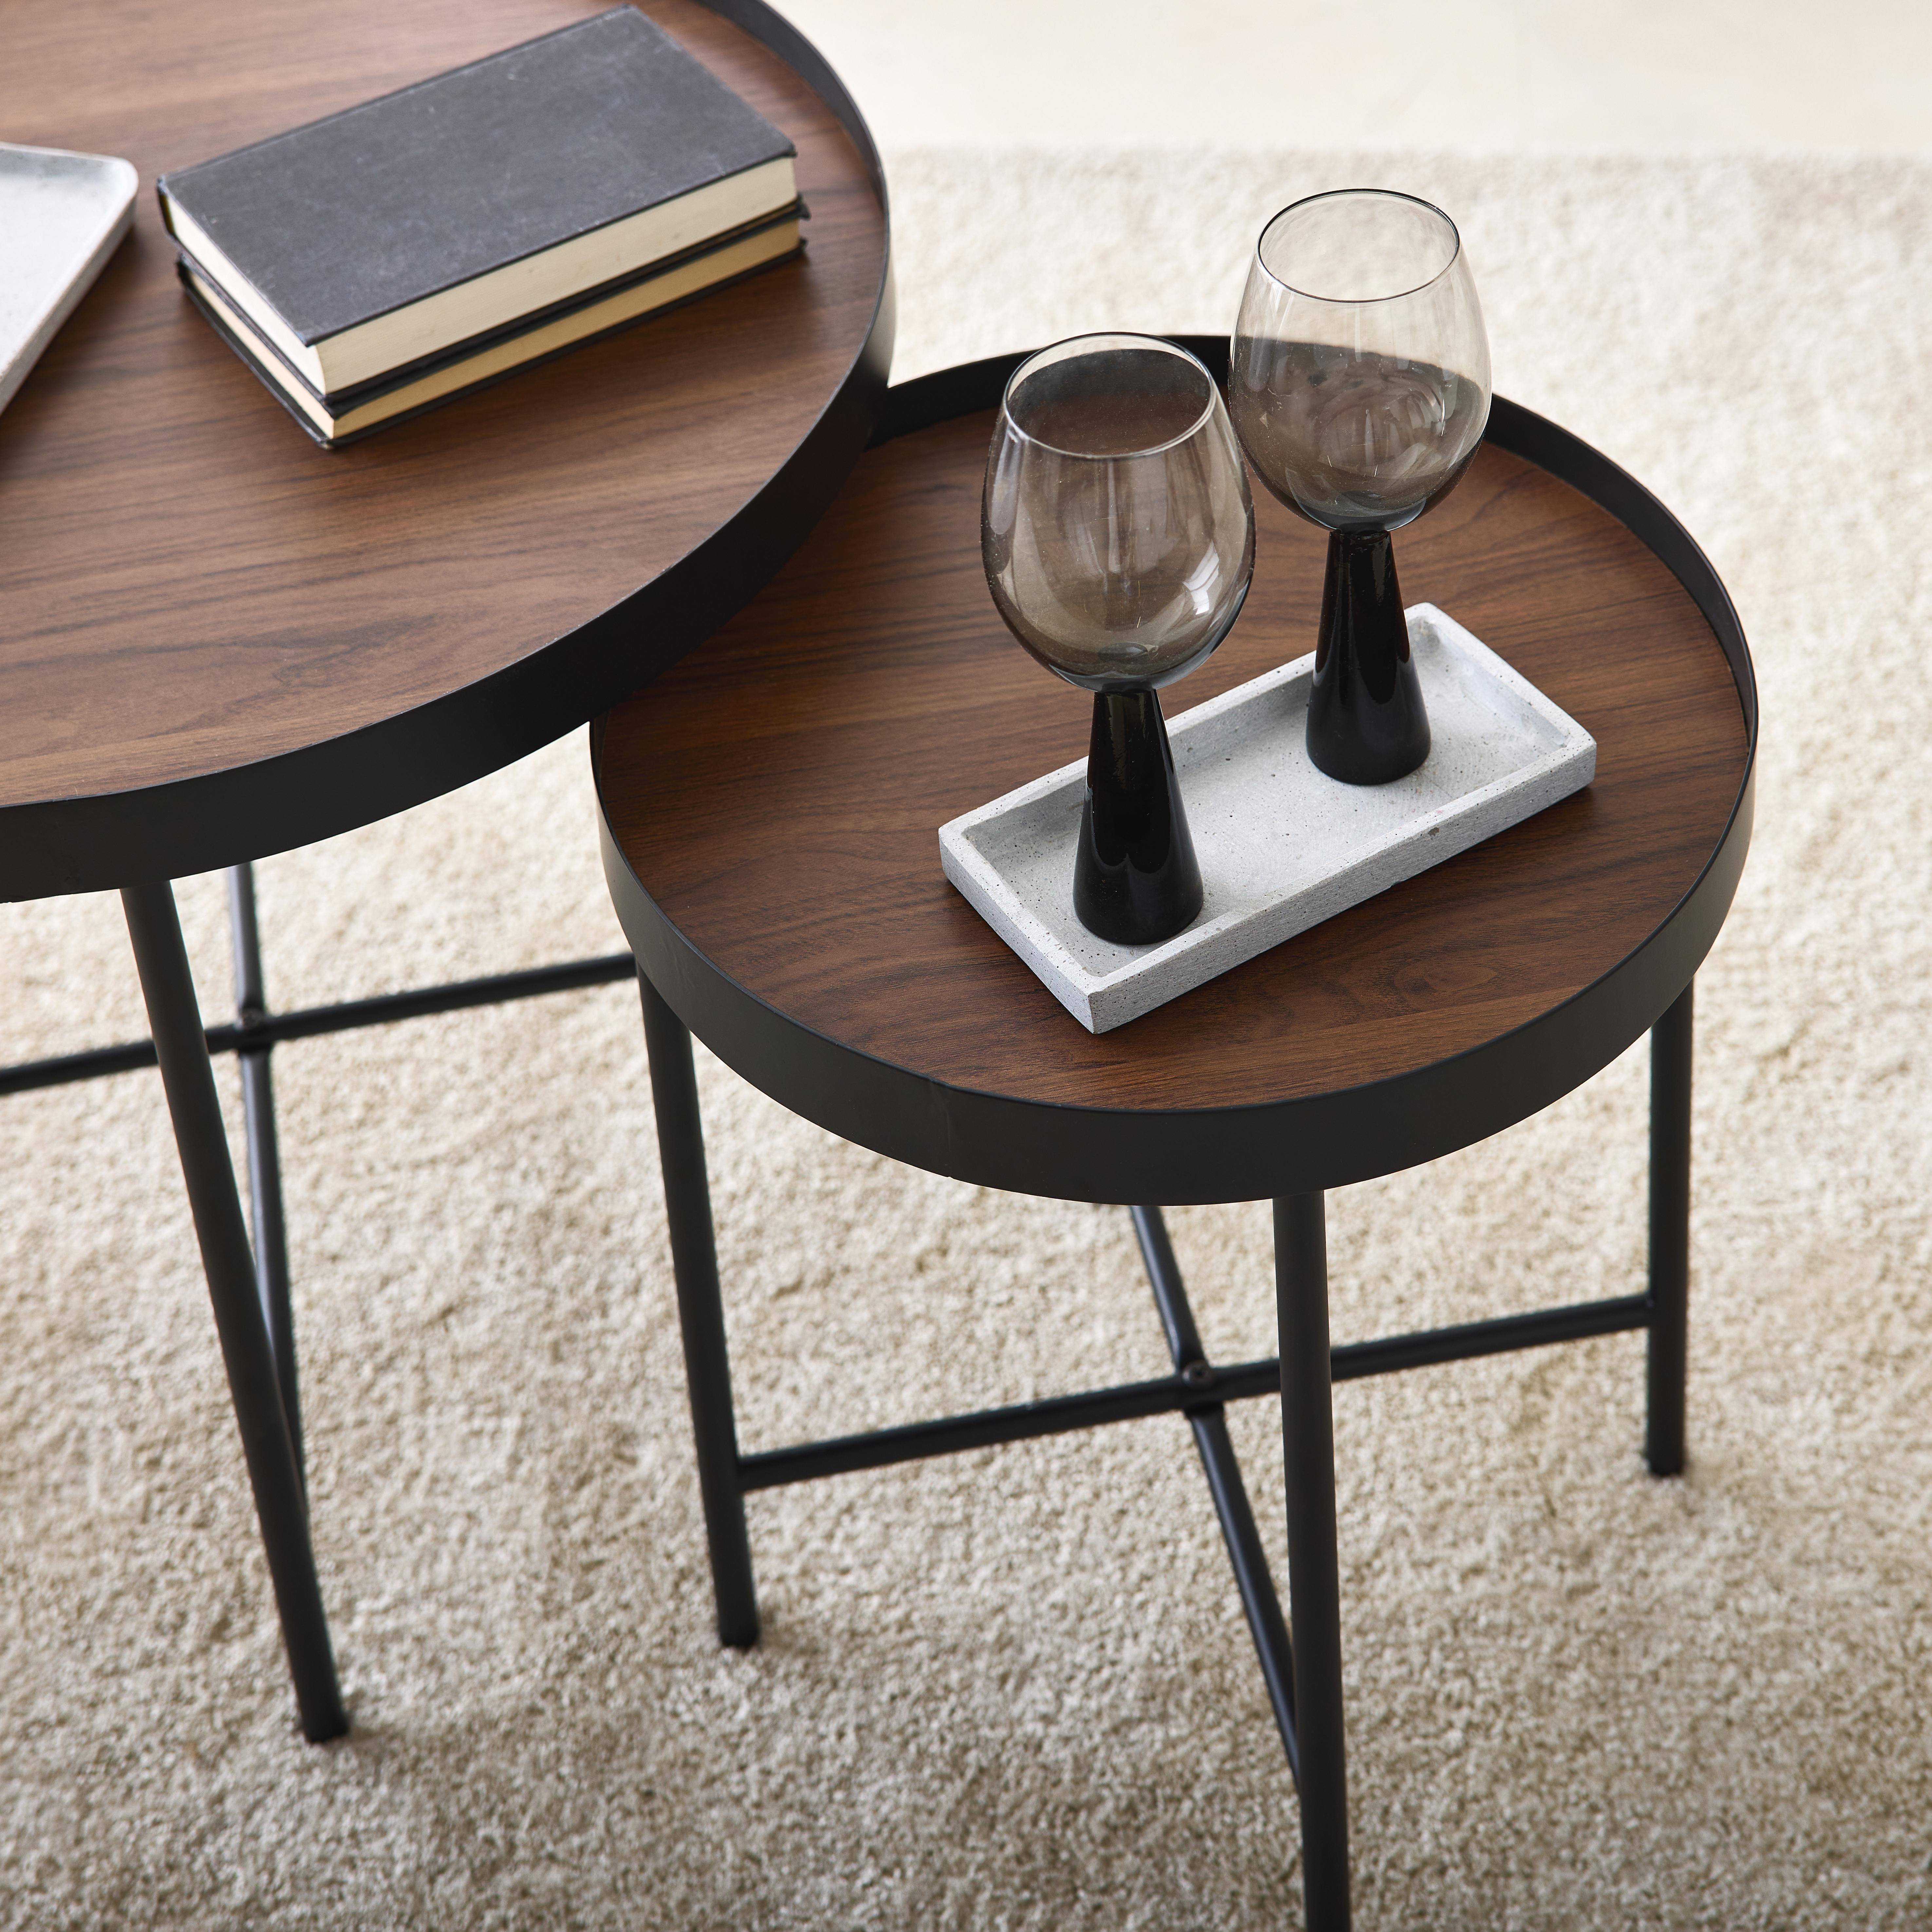 Set of 2 practical round nesting tables in walnut-effect MDF with black legs,sweeek,Photo2